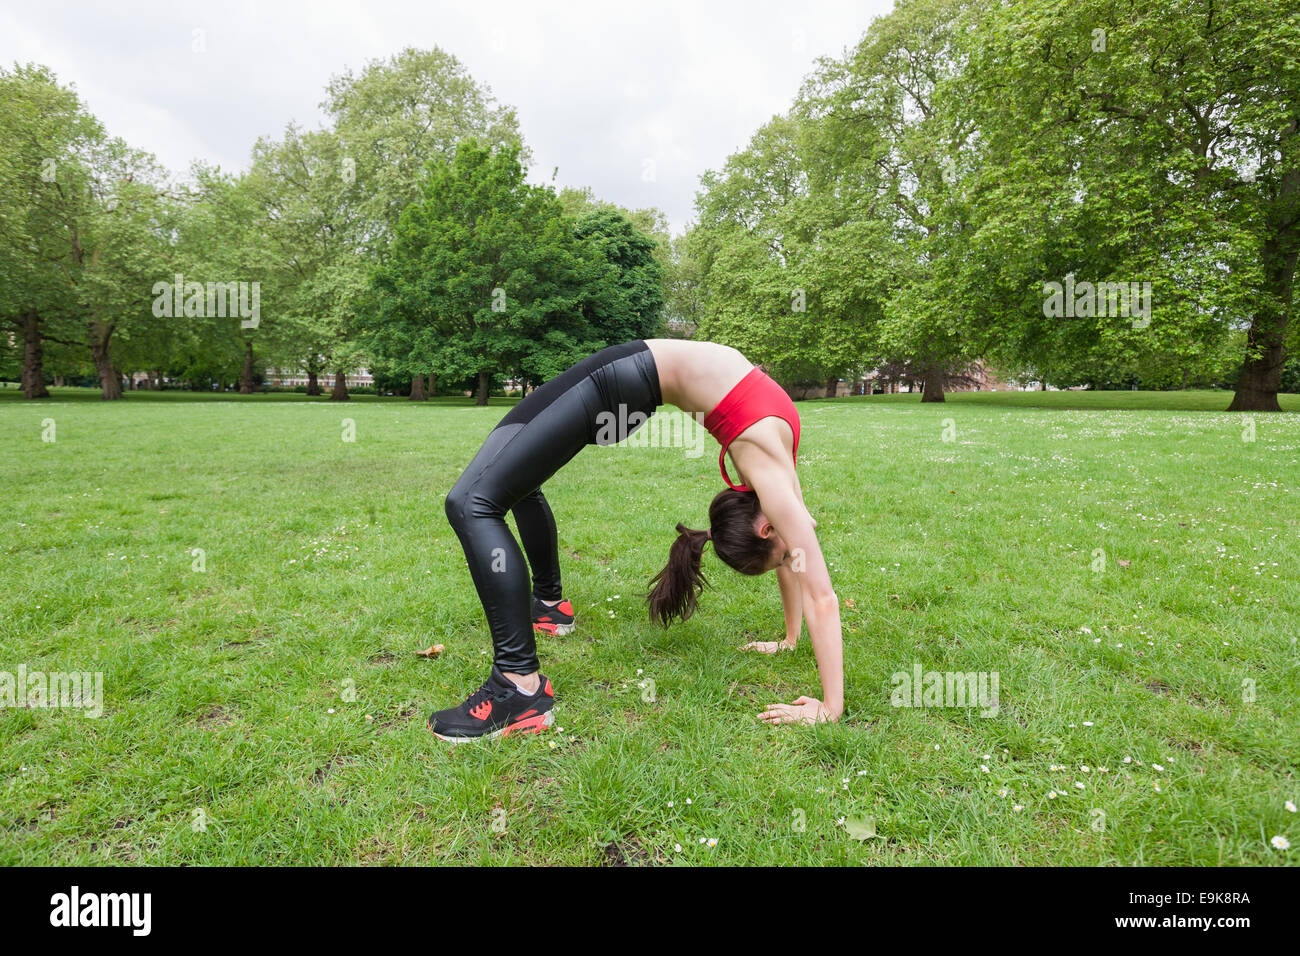 Full length side view of fit woman exercising in park Stock Photo